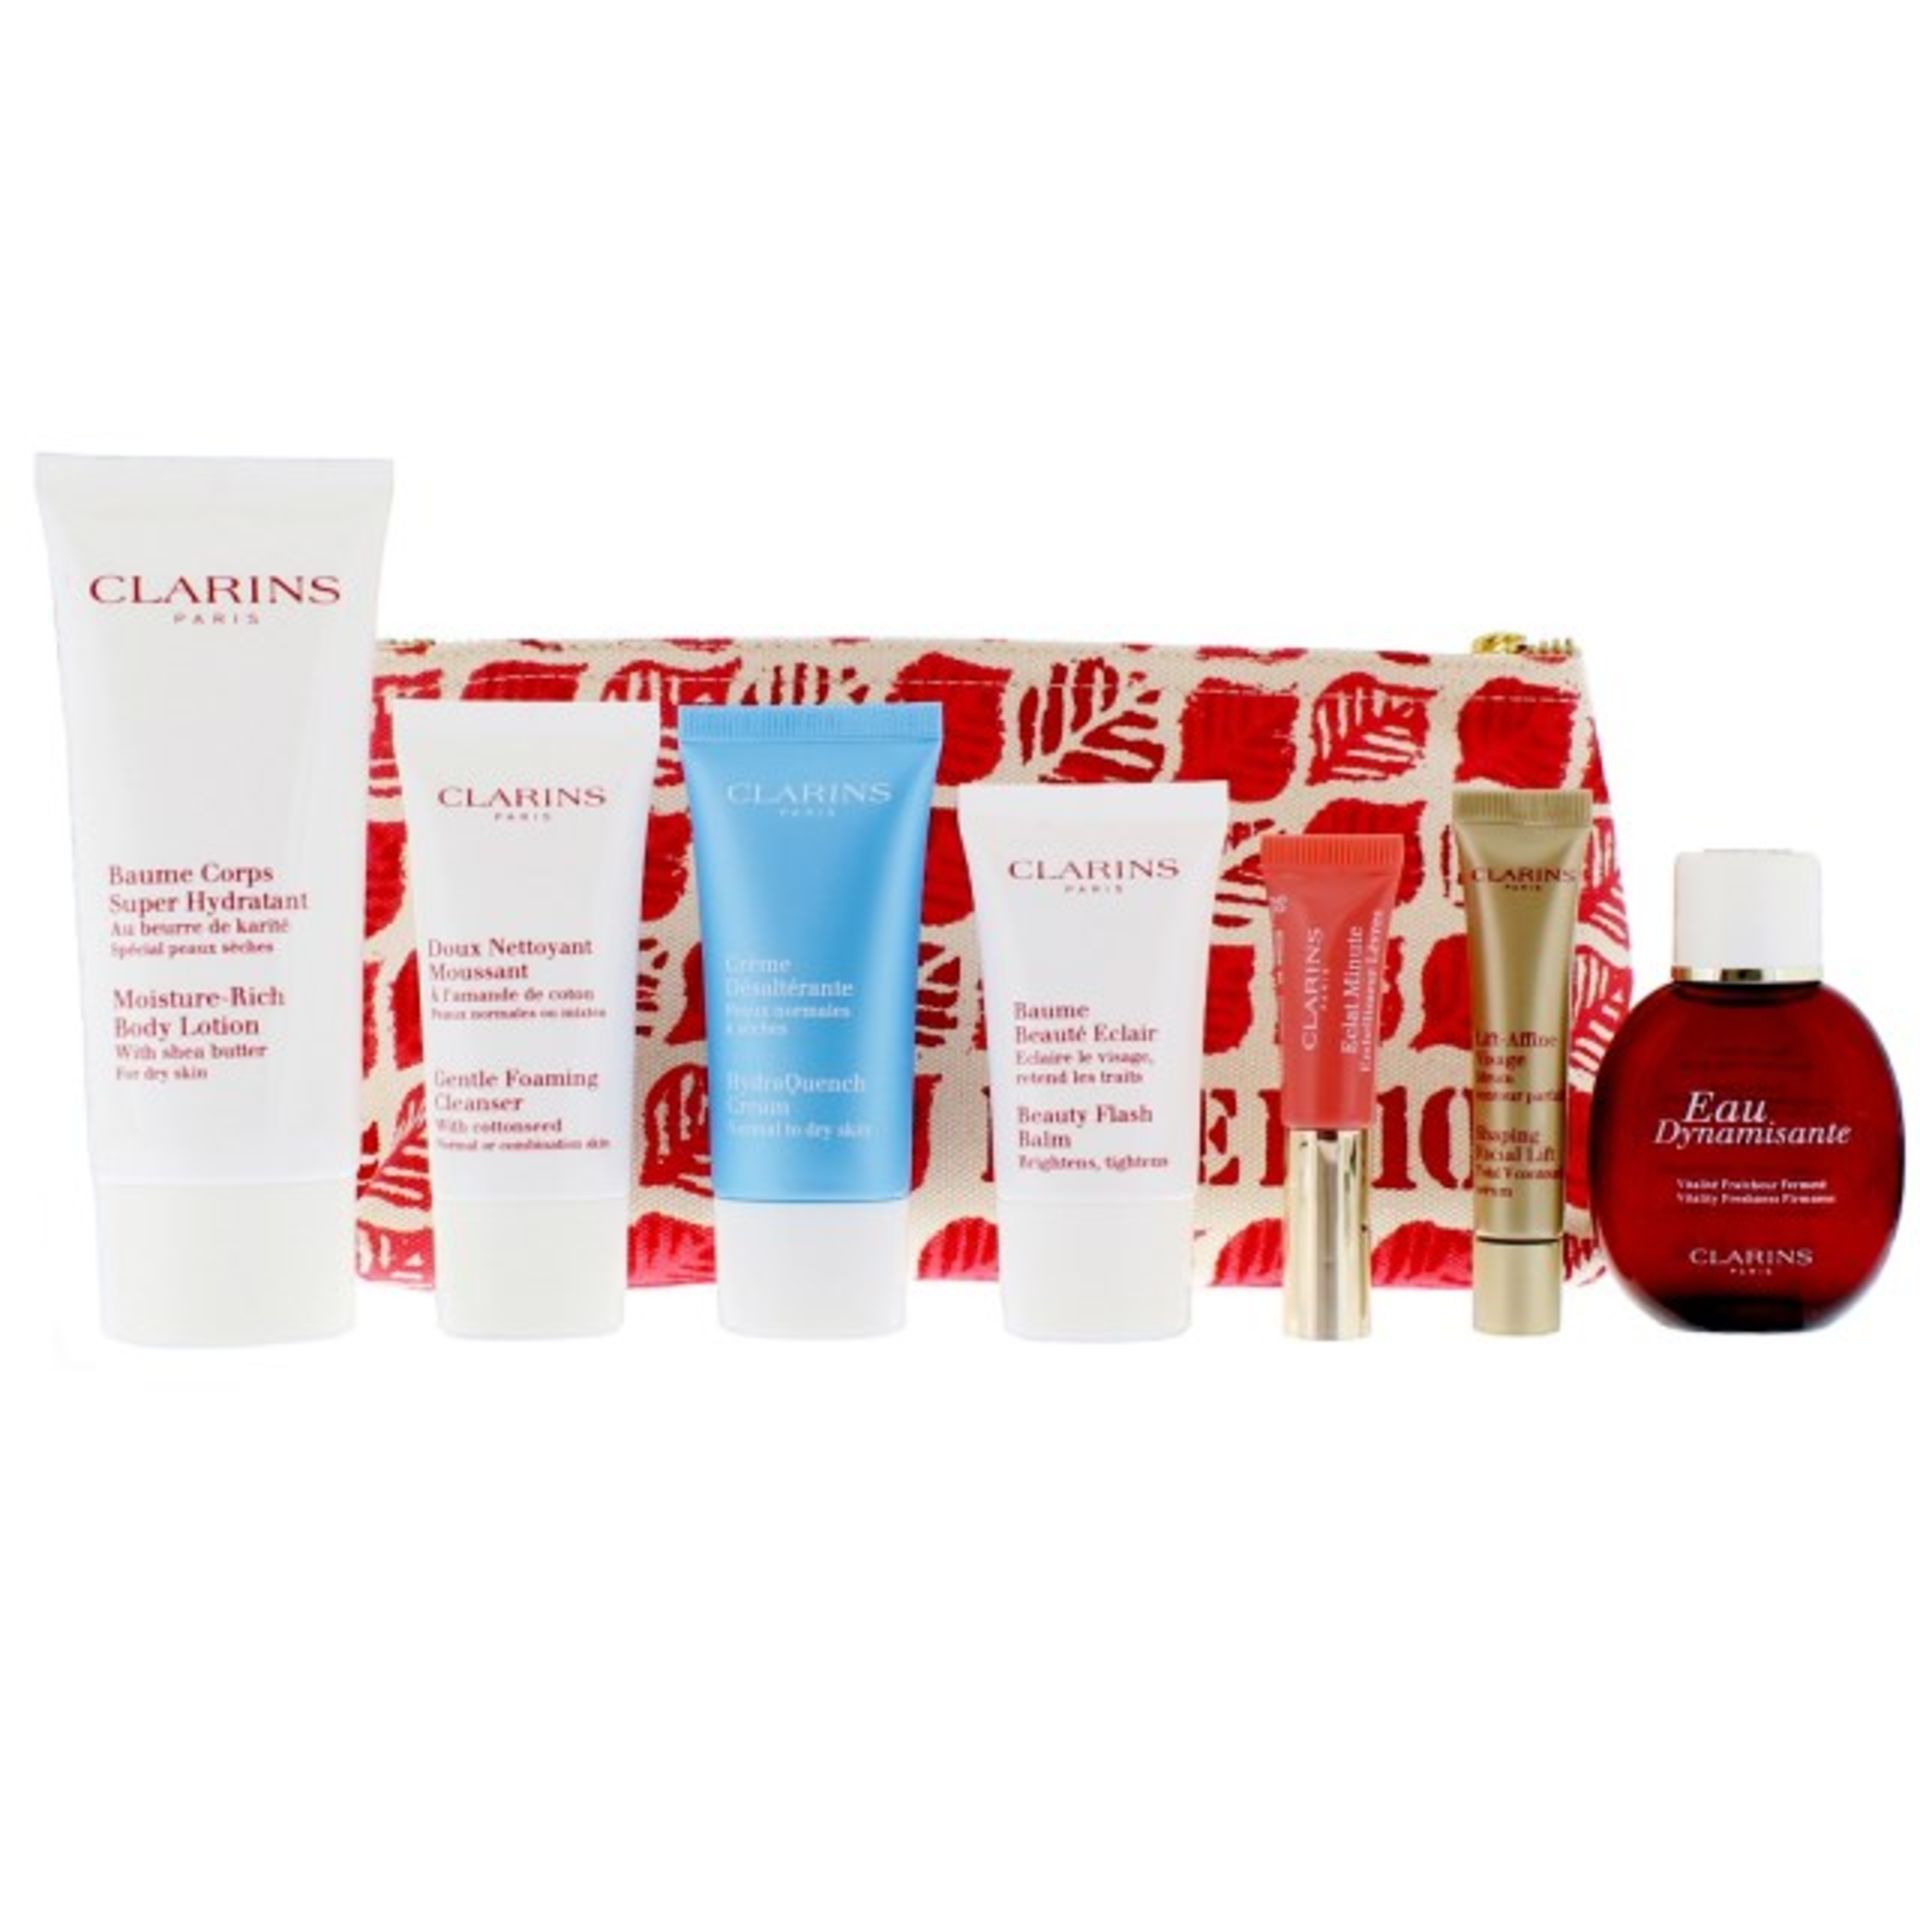 V Brand New Clarins 8pc Feed Your Skin Gift Set Includes Bag - Cleanser - Facial Lift -